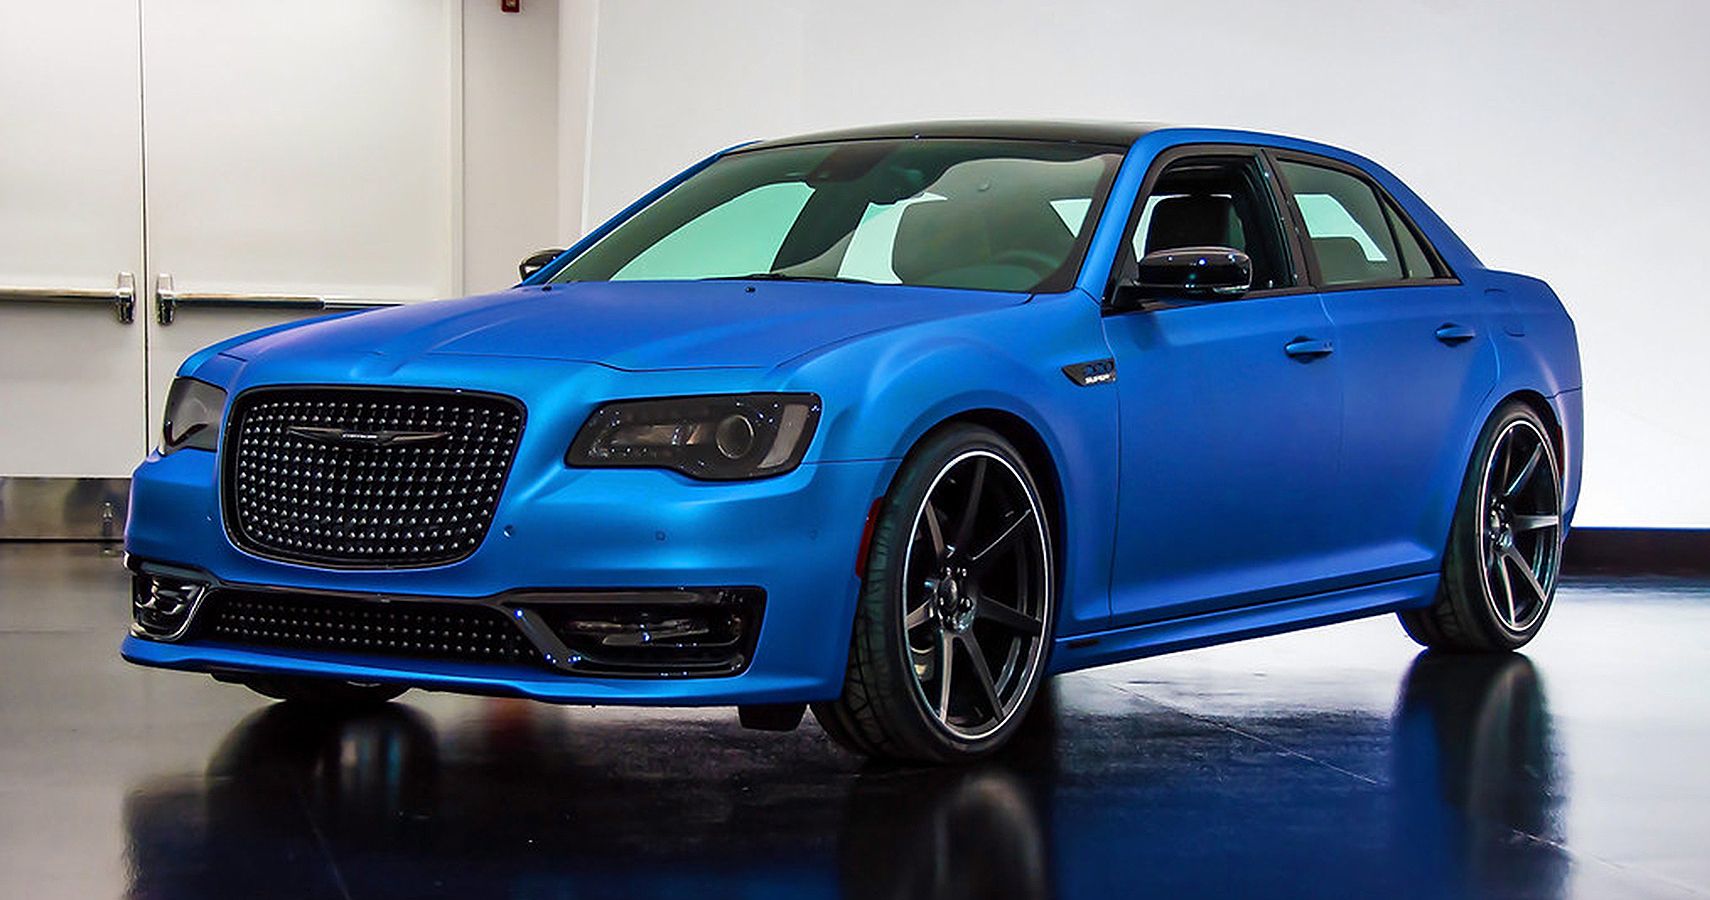 We Badly Want: Chrysler 300 Super S From The World